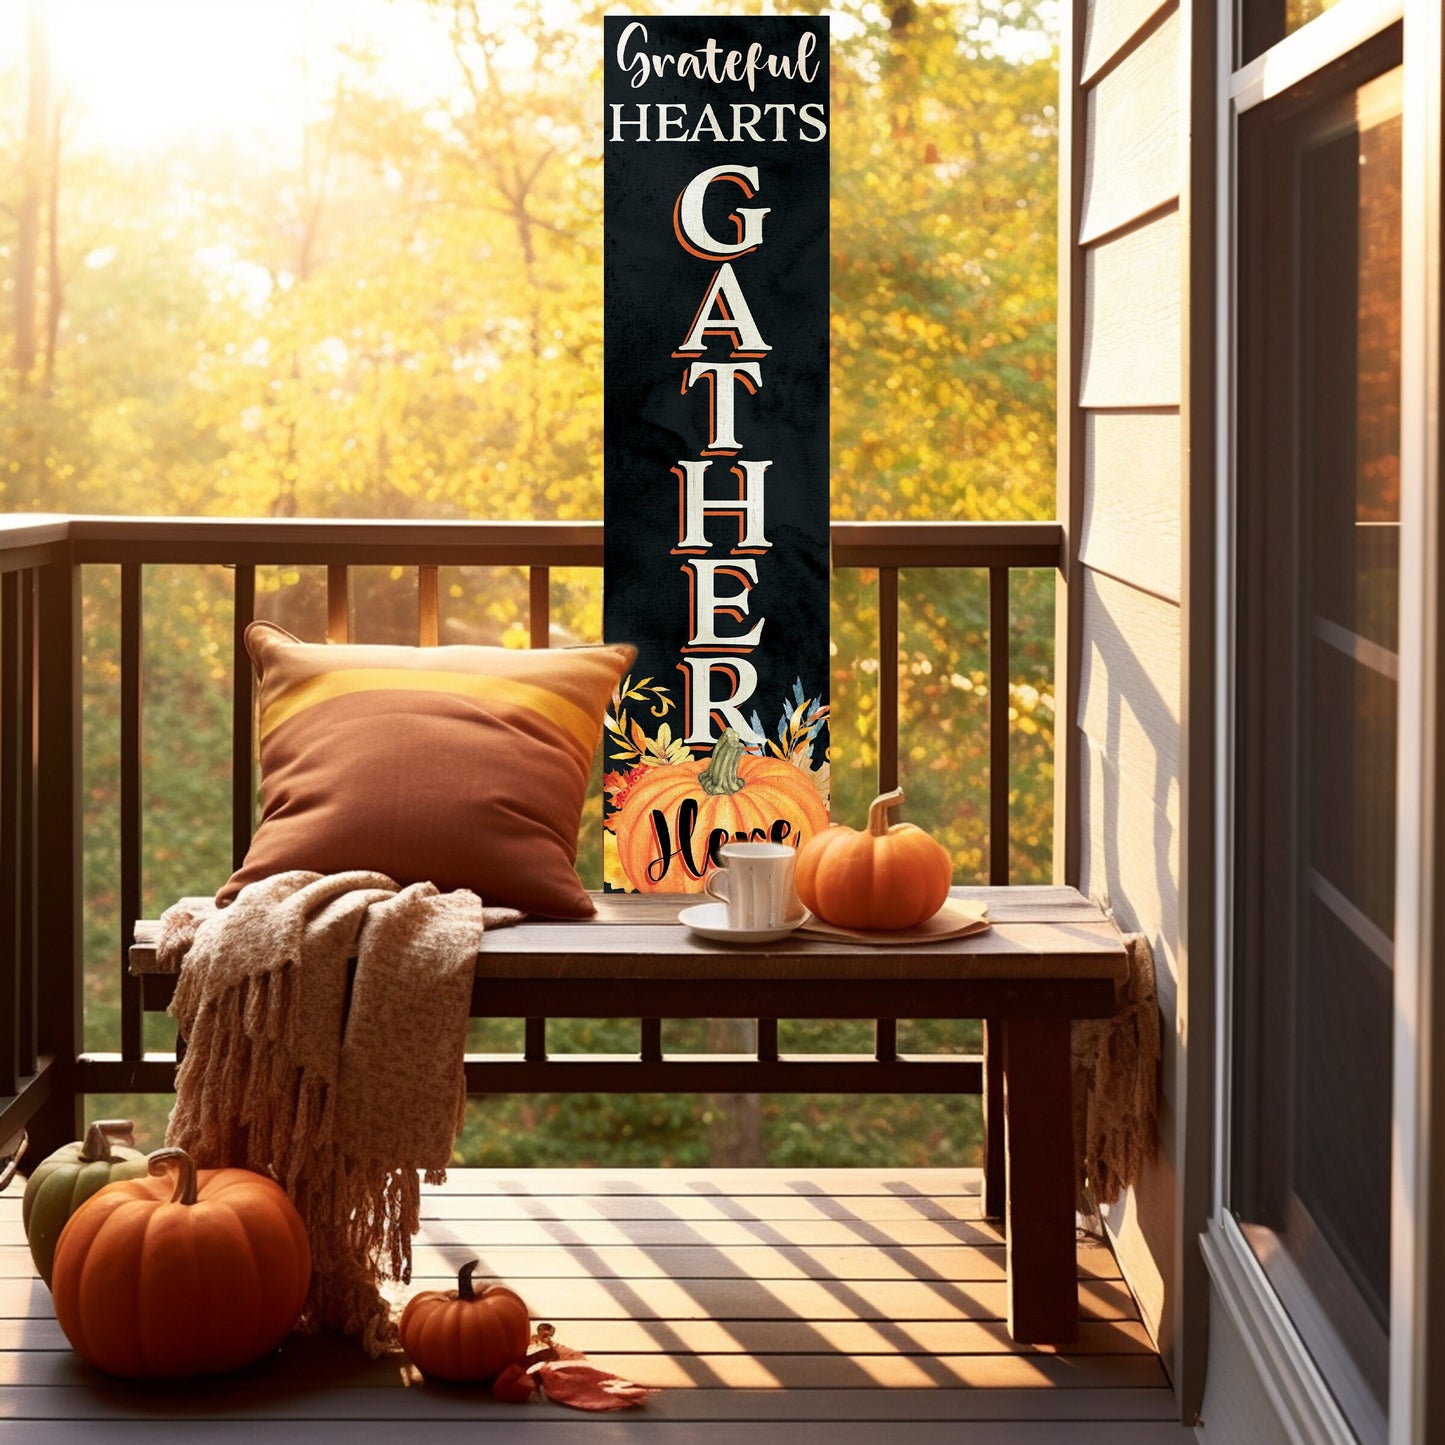 36in "Grateful Hearts Gather Here" Fall Porch Sign - Rustic Wooden Decor for Front Door Display during Autumn Celebrations